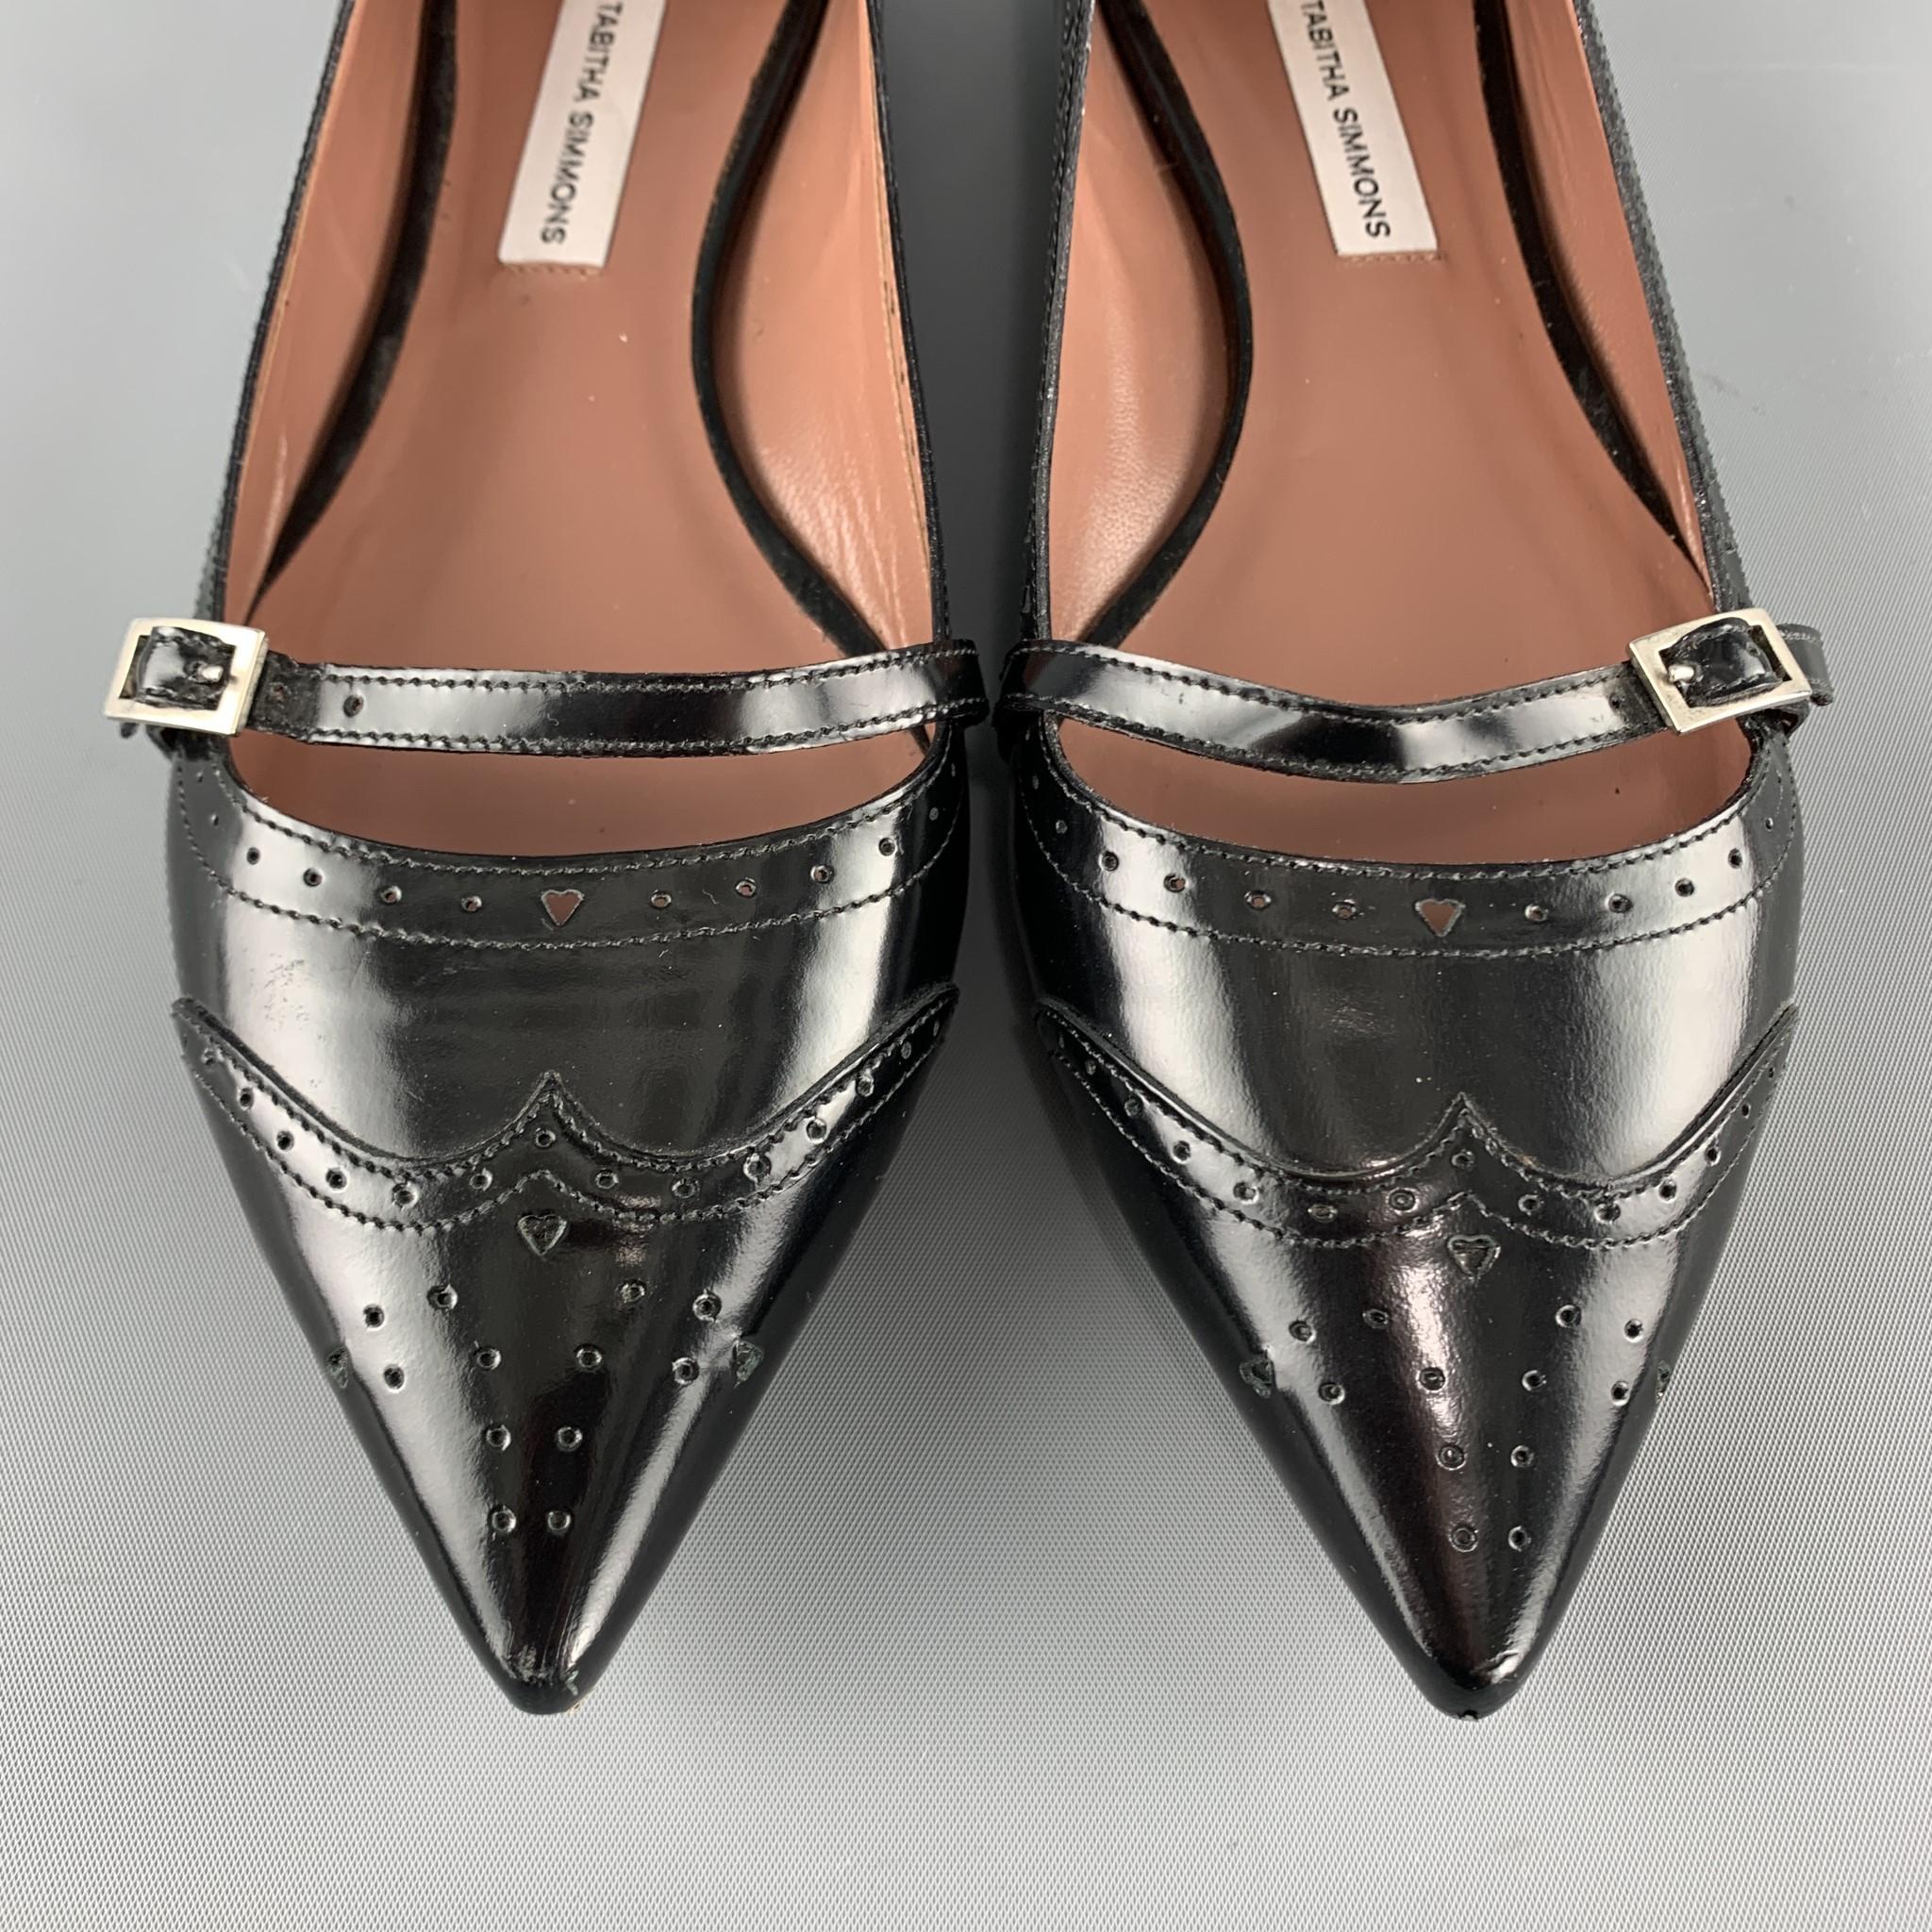 TABITHA SIMMONS flats come in black patent leather with a perforated pointed wingtip, perforated hearts trim, and Mary Jane strap. Made in Italy.

Very Good Pre-Owned Condition.
Marked: IT 37
Original Retail Price: $695.00

Outsole: 10.5 x 3 in.